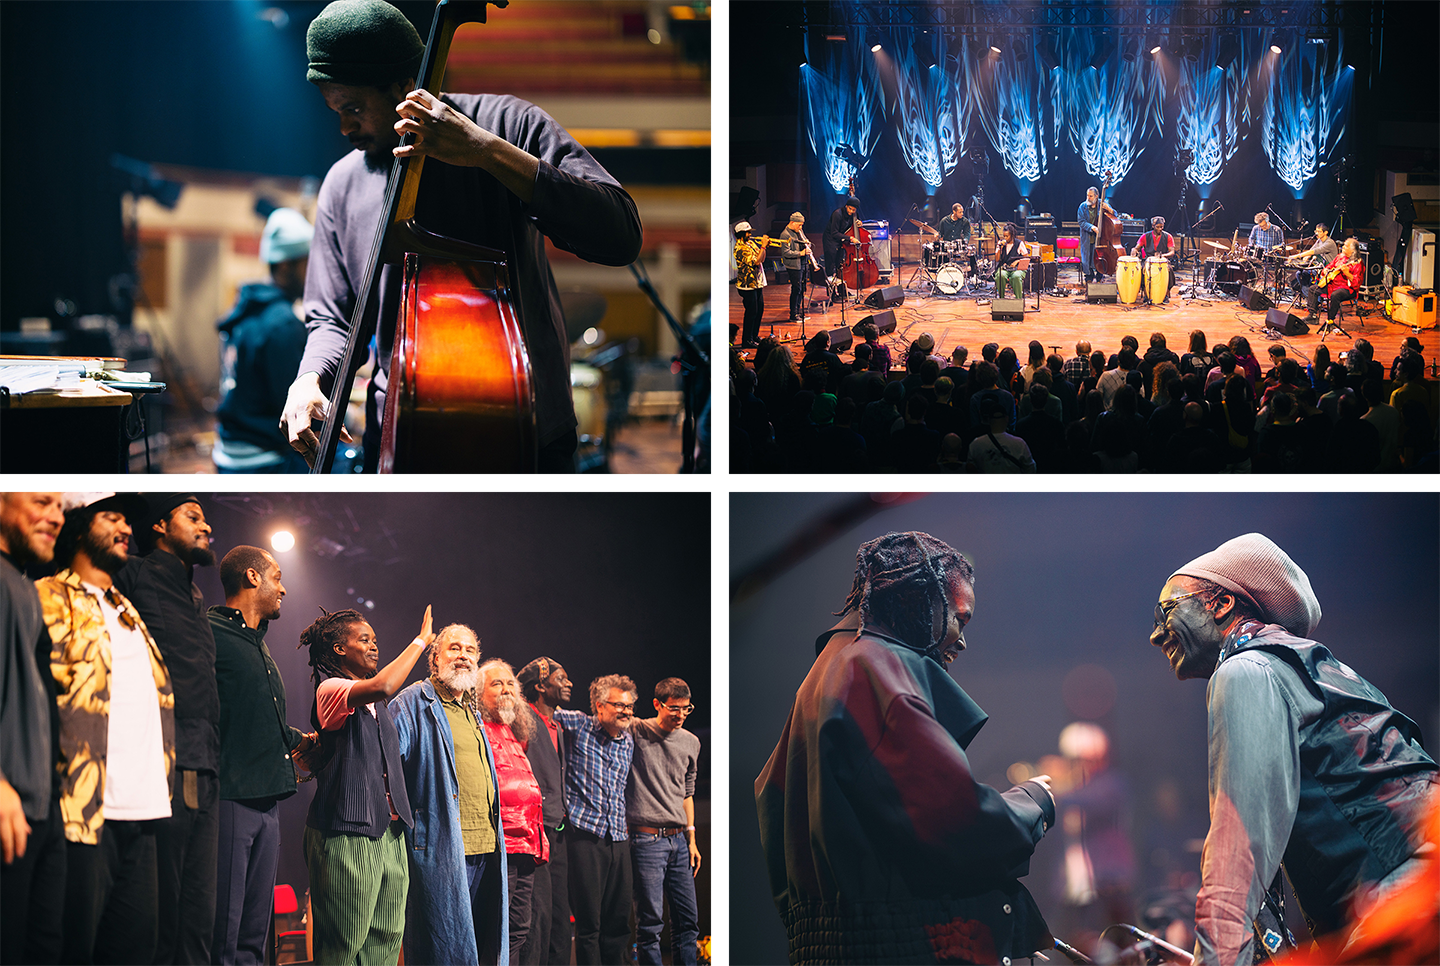 four photos that portray members of The Harvest Time Project on stage during their performance at Le Guess Who Festival. in one of the photos, all the members are lined up, thanking the audience 